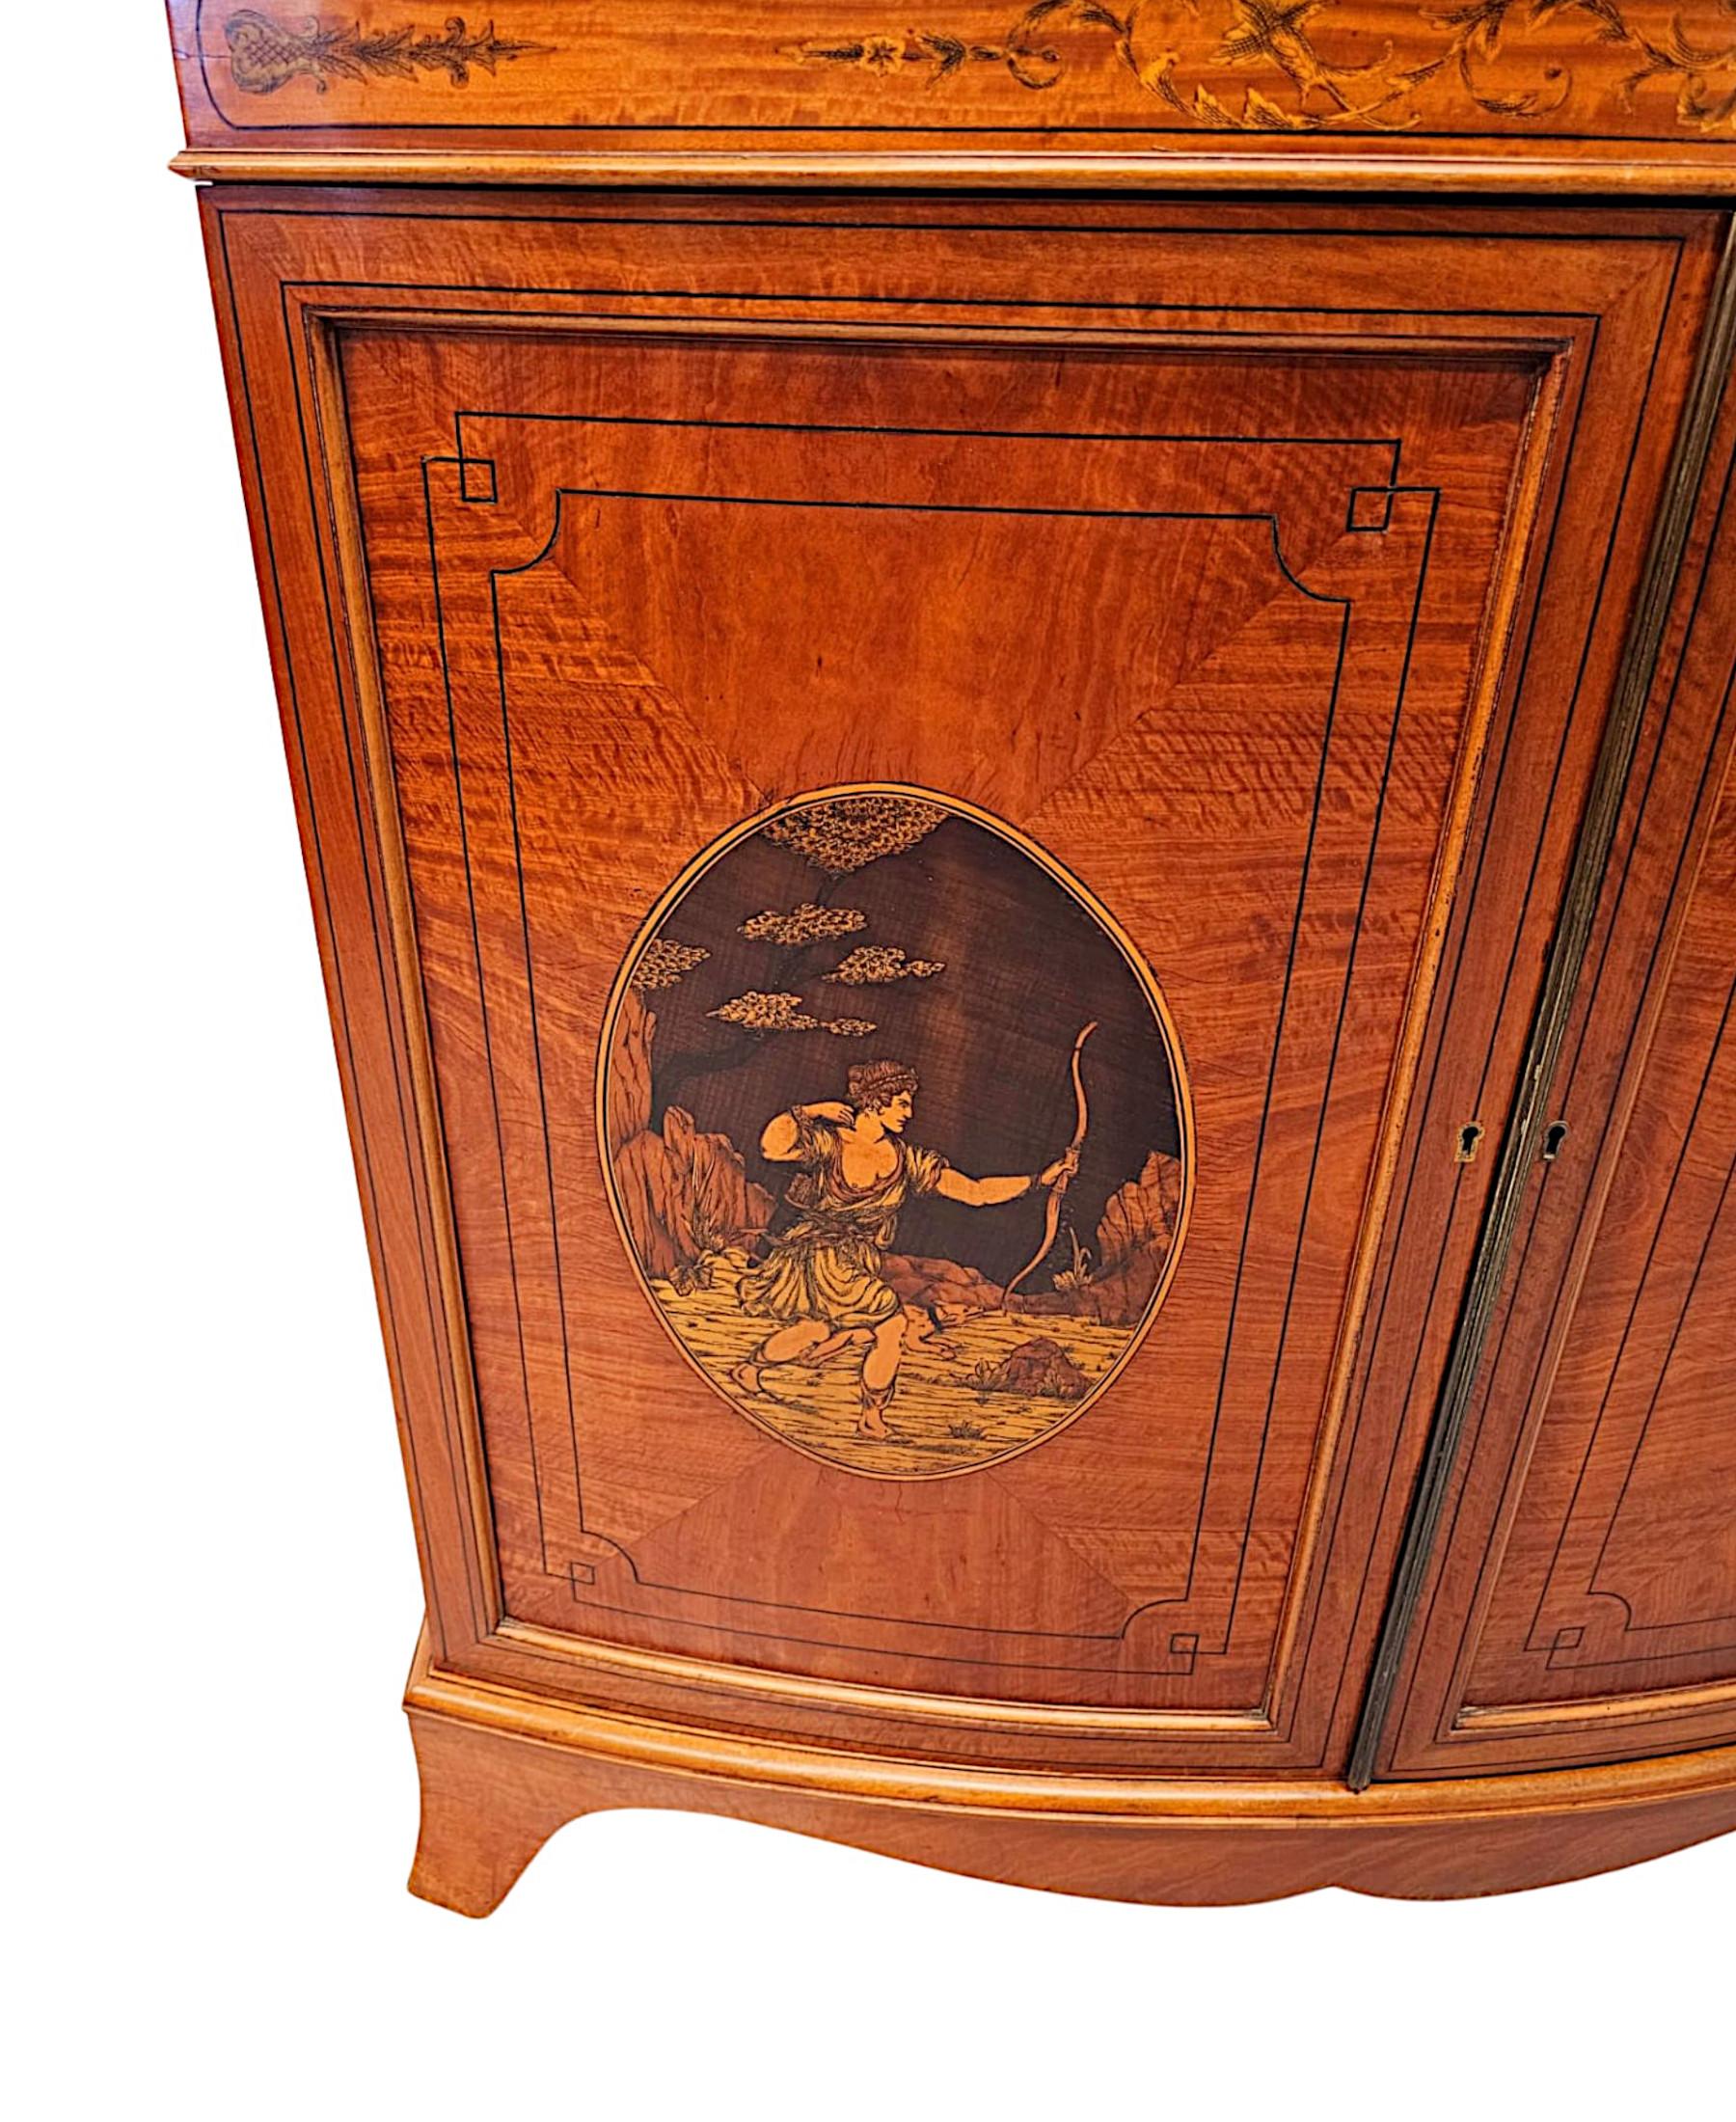 A  Fine Edwardian Marquetry Inlaid Bowfronted Bookcase afterf Edward and Roberts For Sale 3